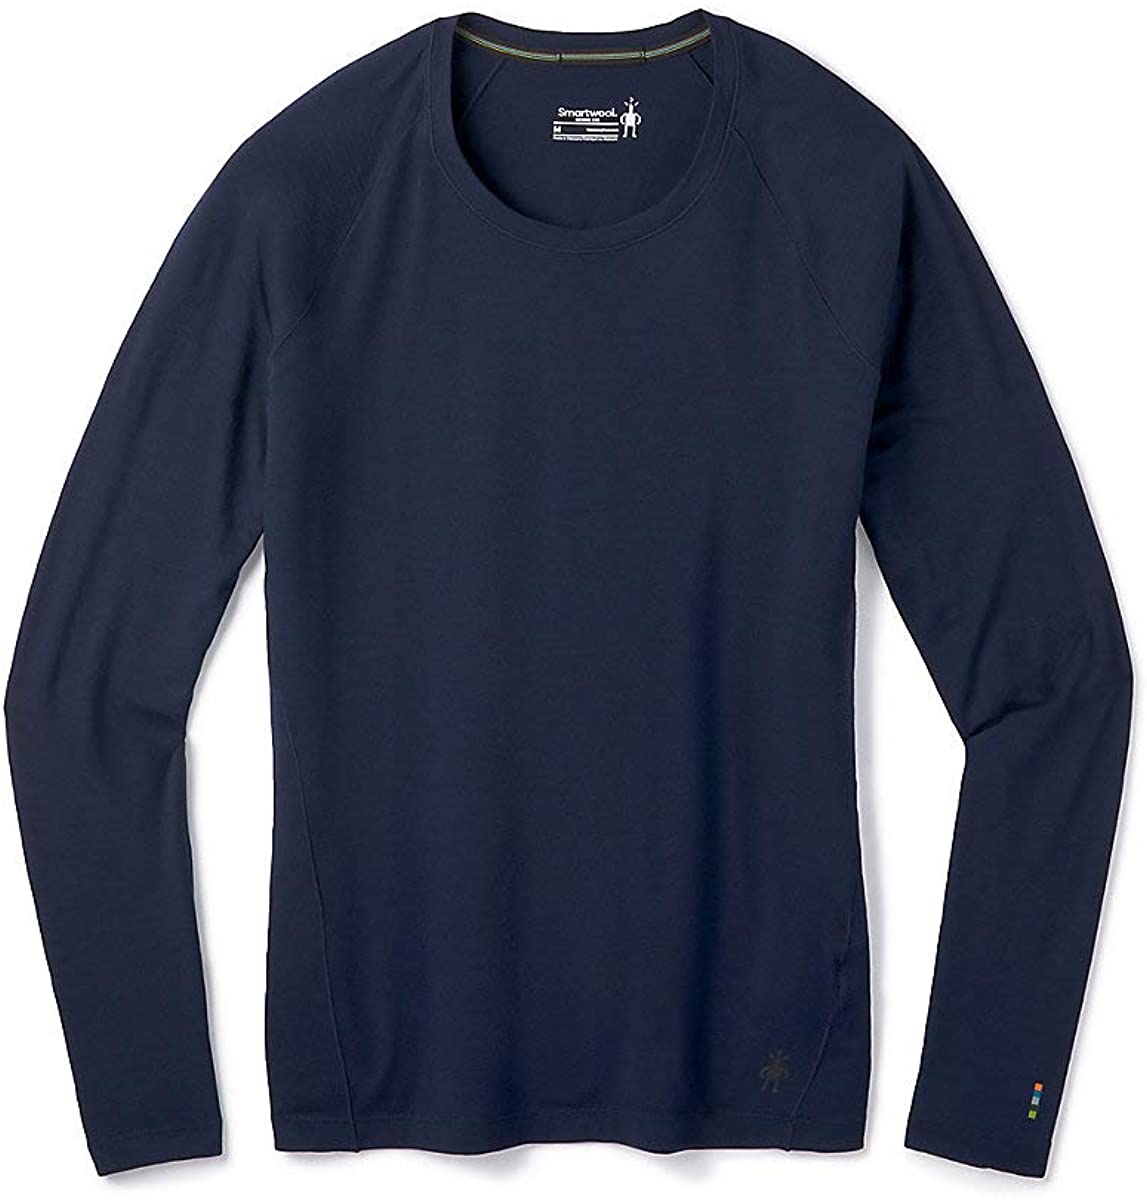 Women's Smartwool Merino 150 Base Layer Long Sleeve in Deep Navy from the side view